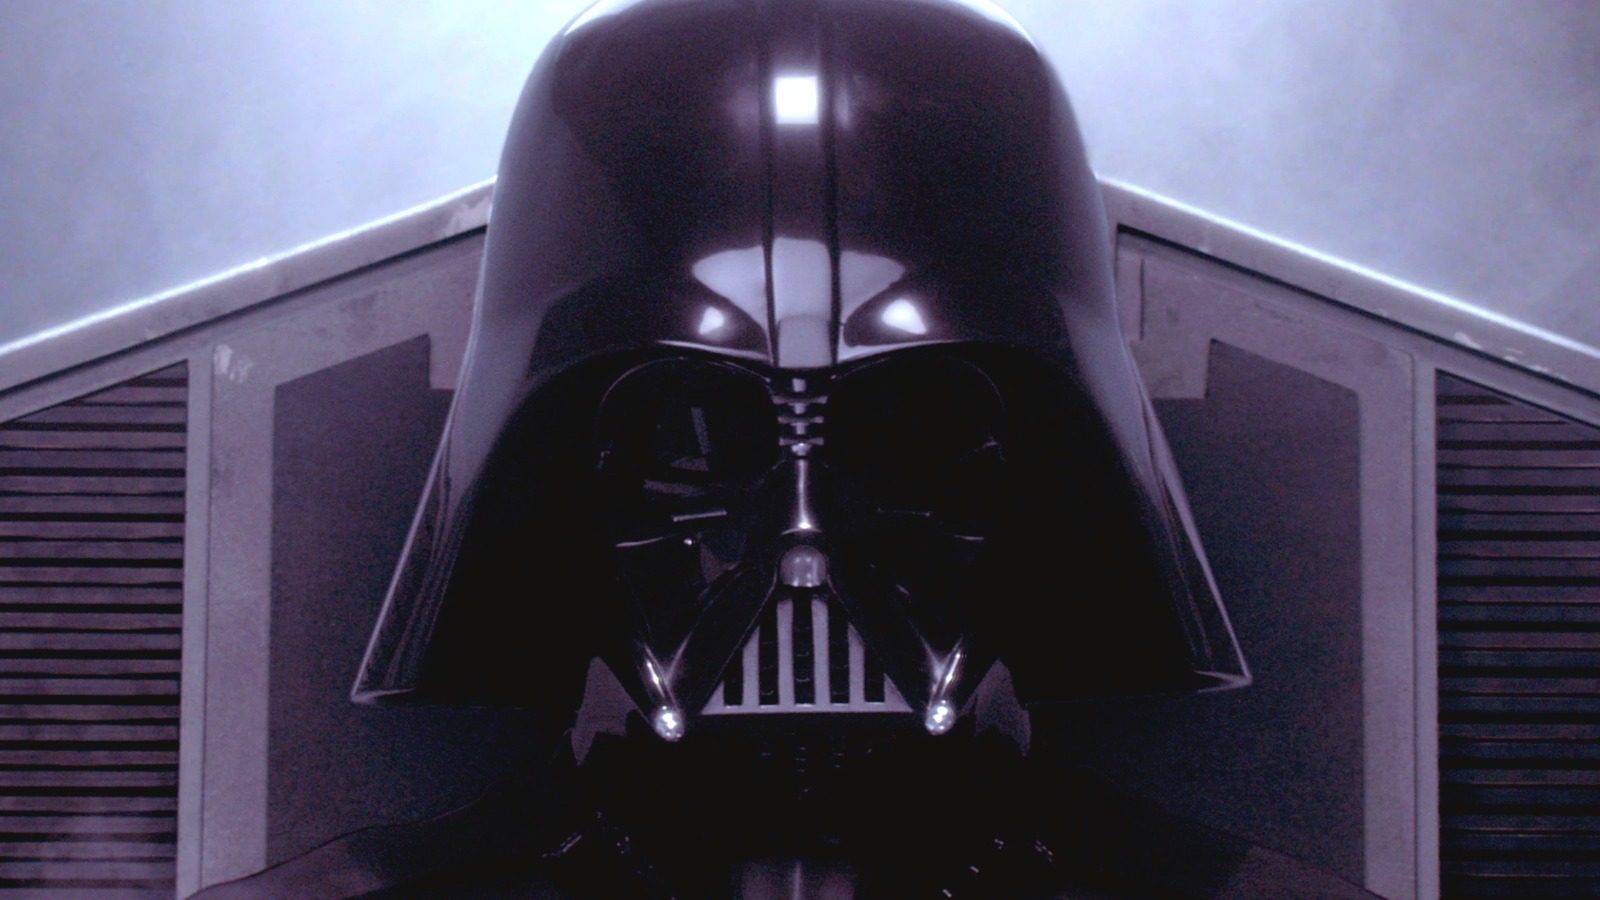 Why Does Darth Vader Wear A Mask, A Cape, And Body Armor?